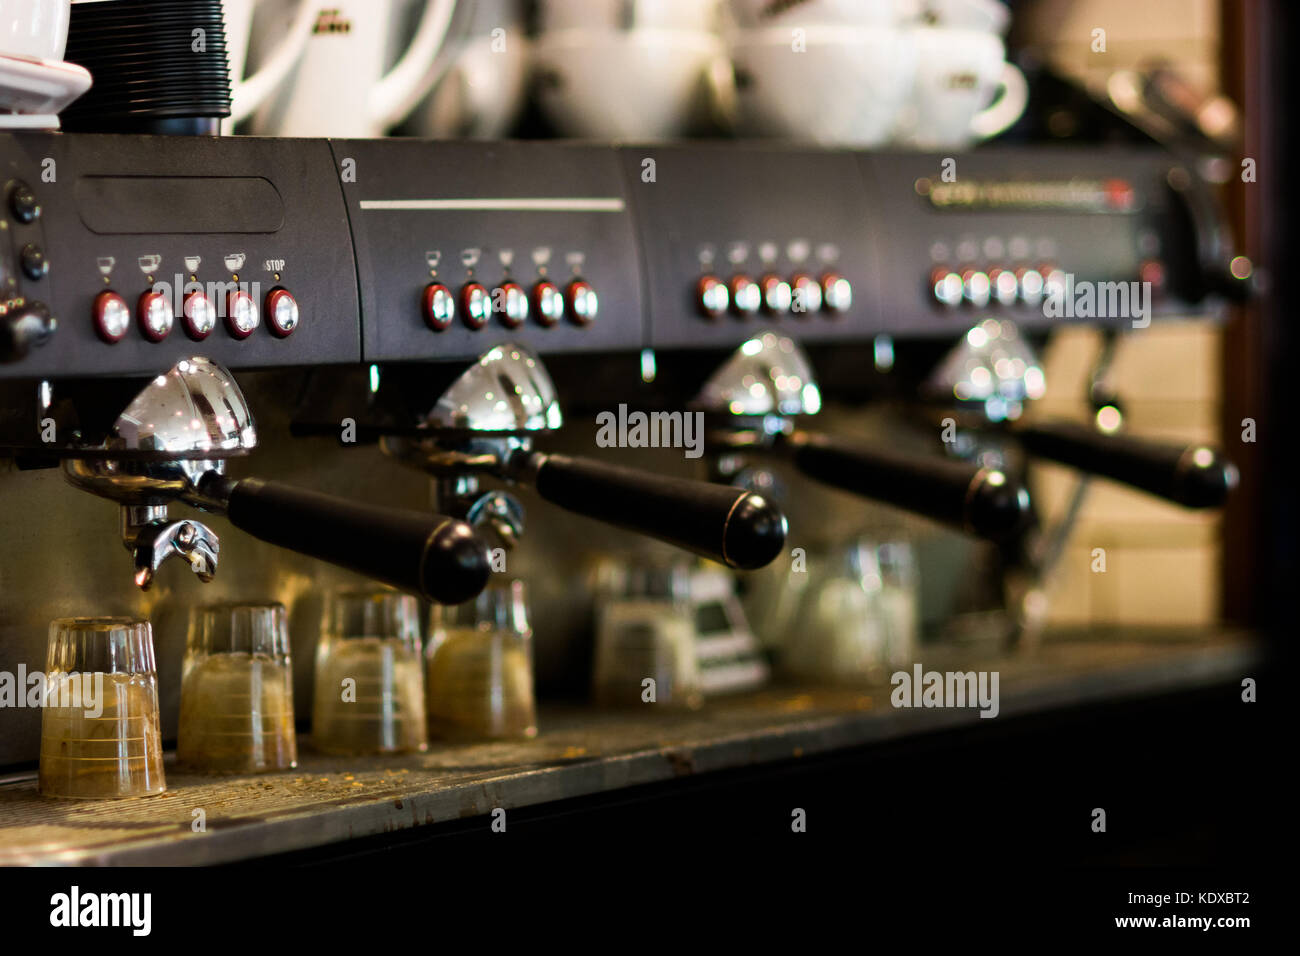 Coffee machines taken in a local cafe Stock Photo